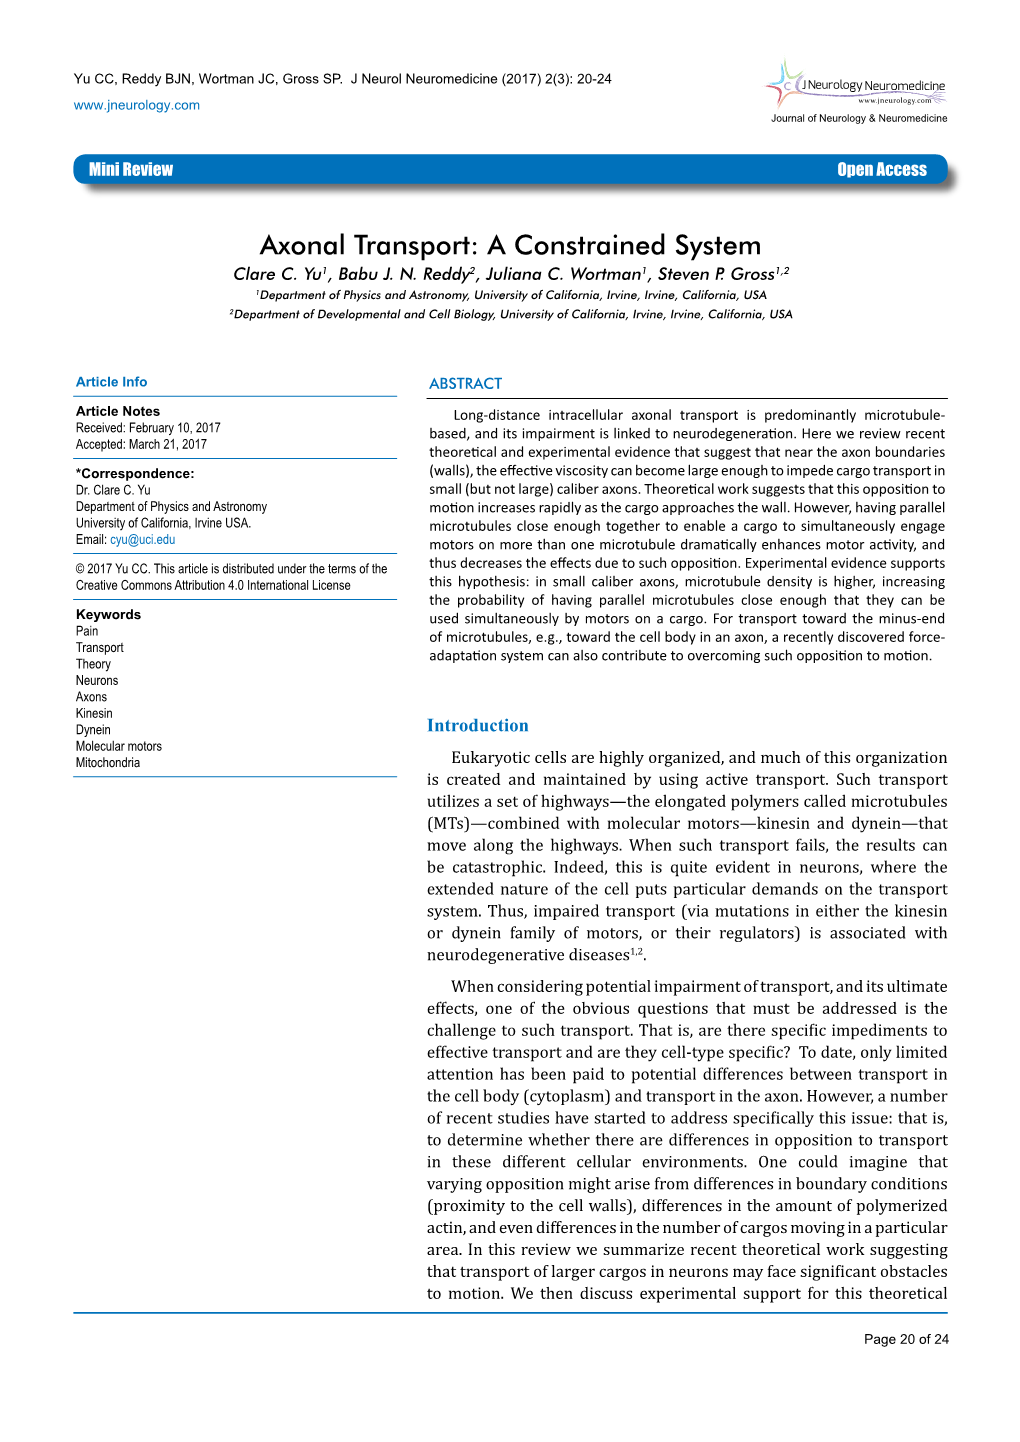 Axonal Transport: a Constrained System Clare C